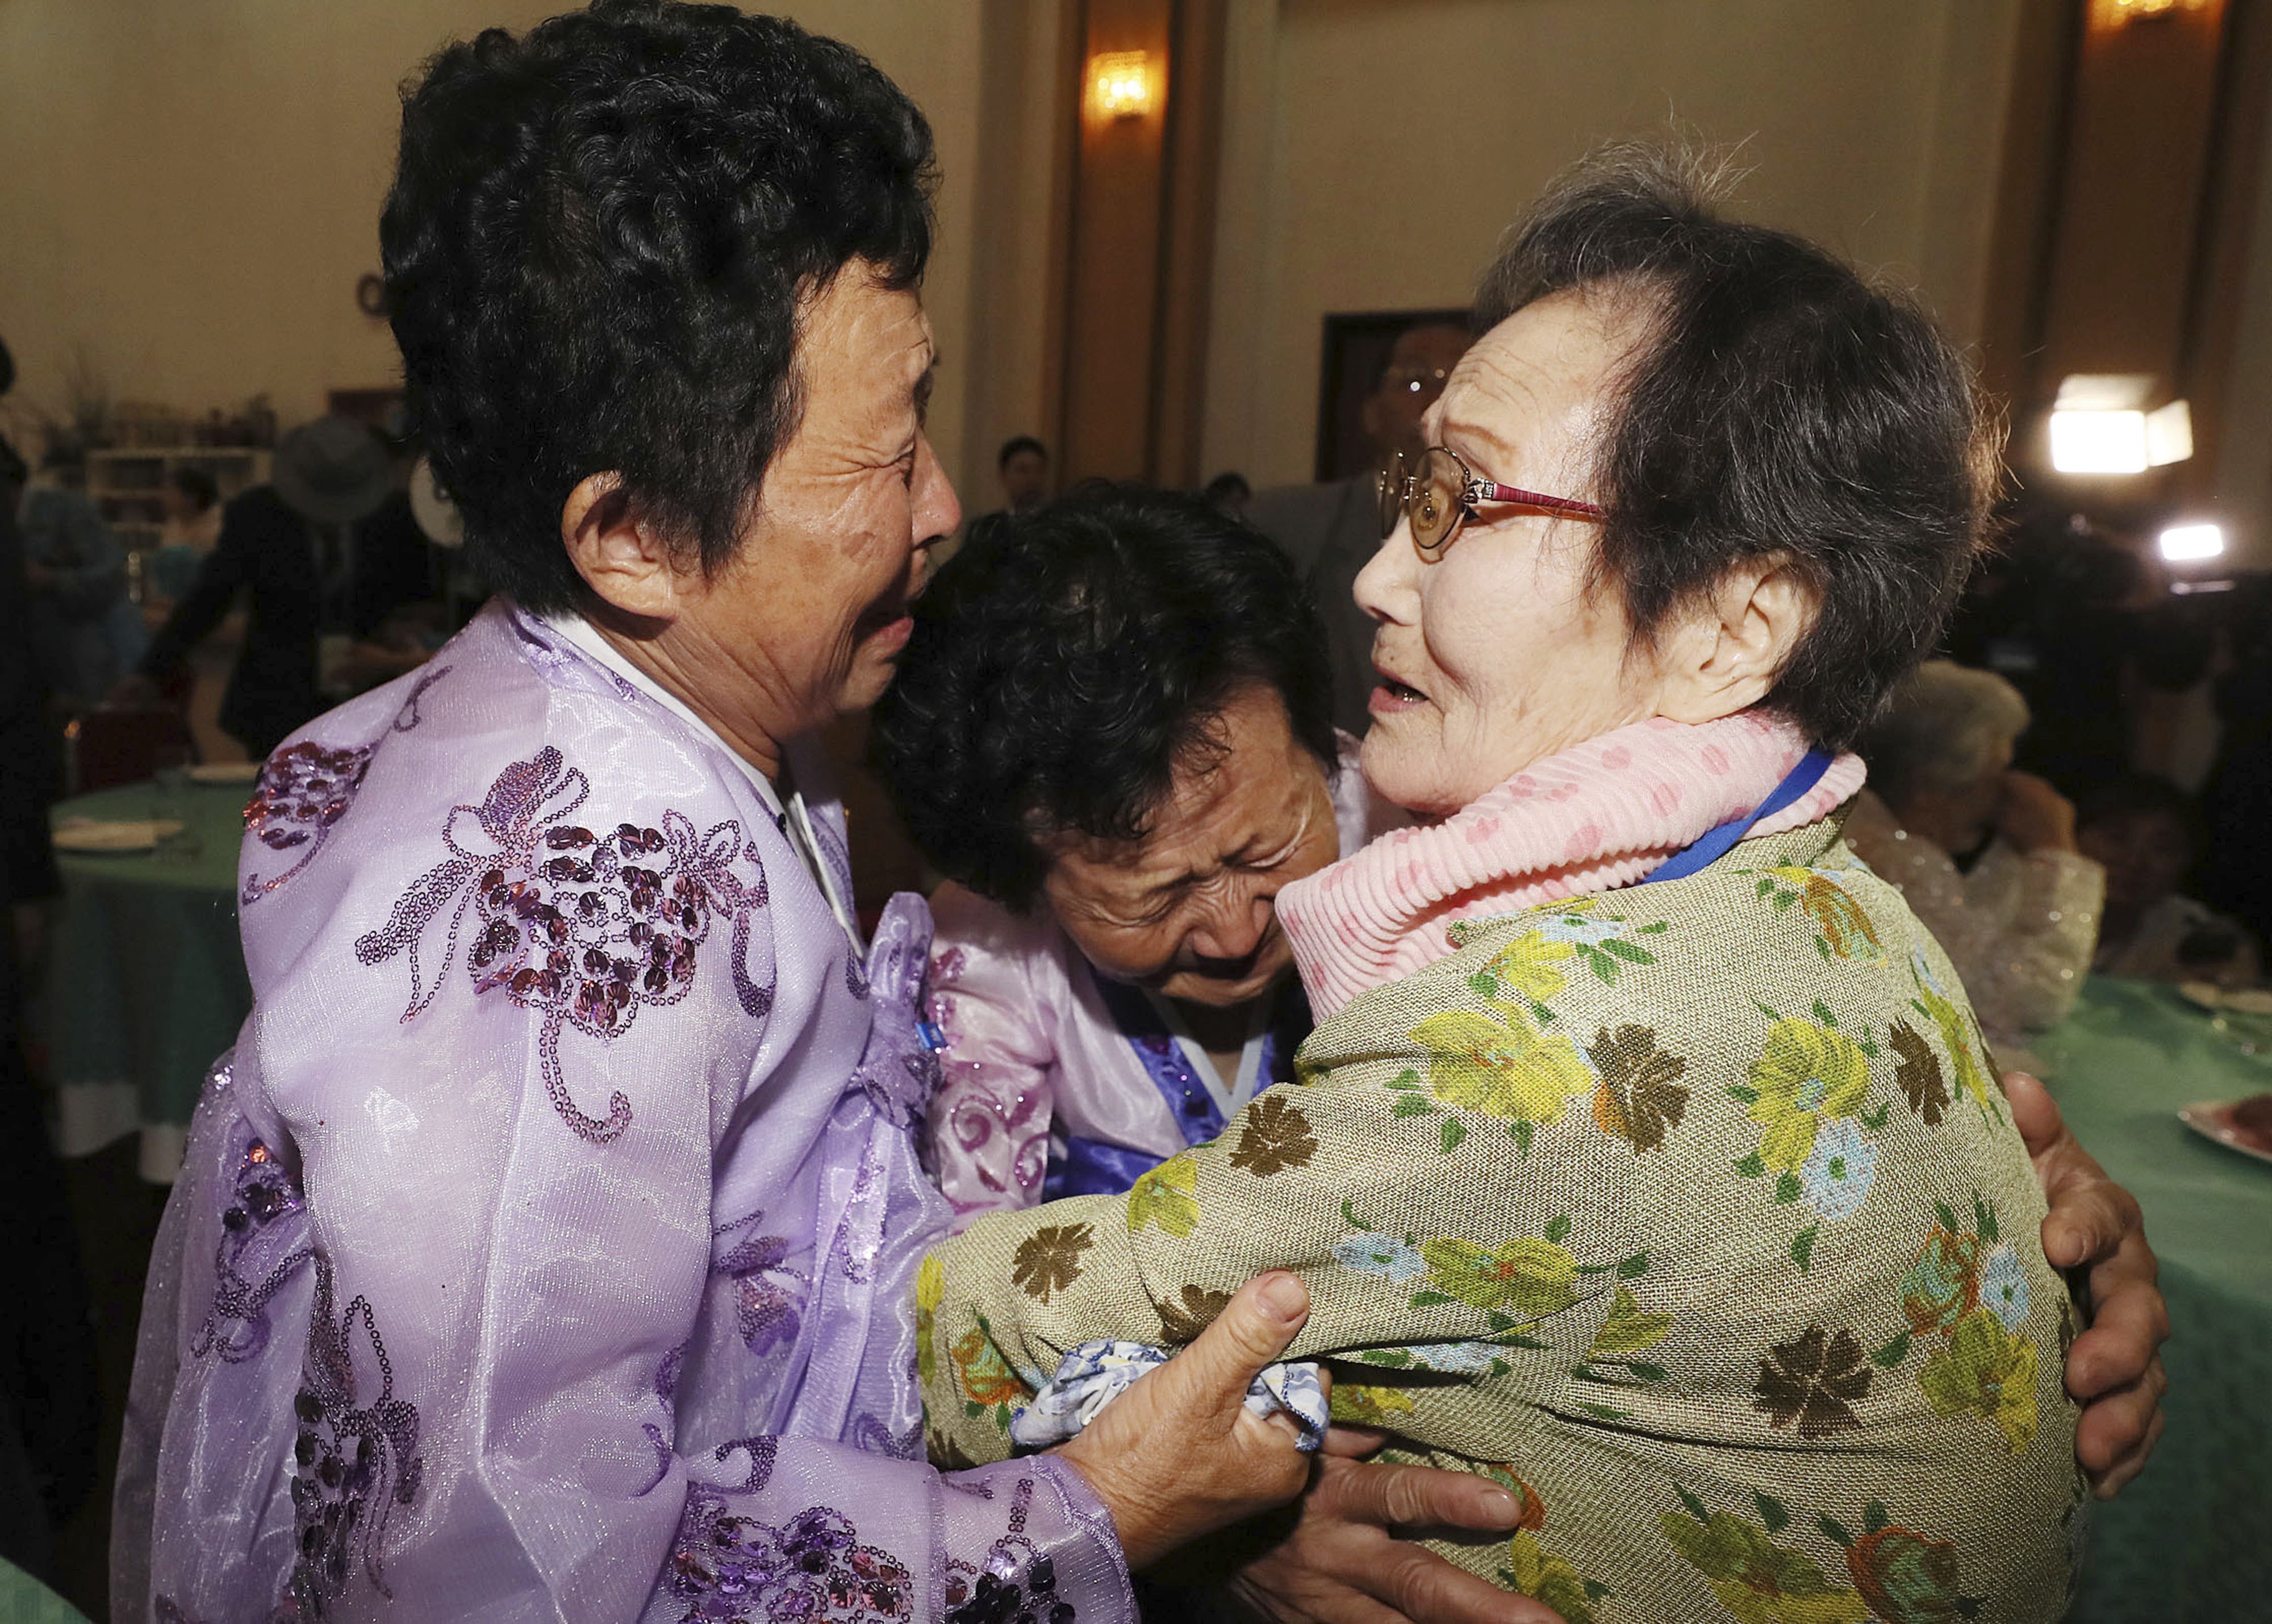 By allowing limited reunions with Koreans divided by the country’s separation in 1945, North Korea exploits human suffering to inflict more punishment